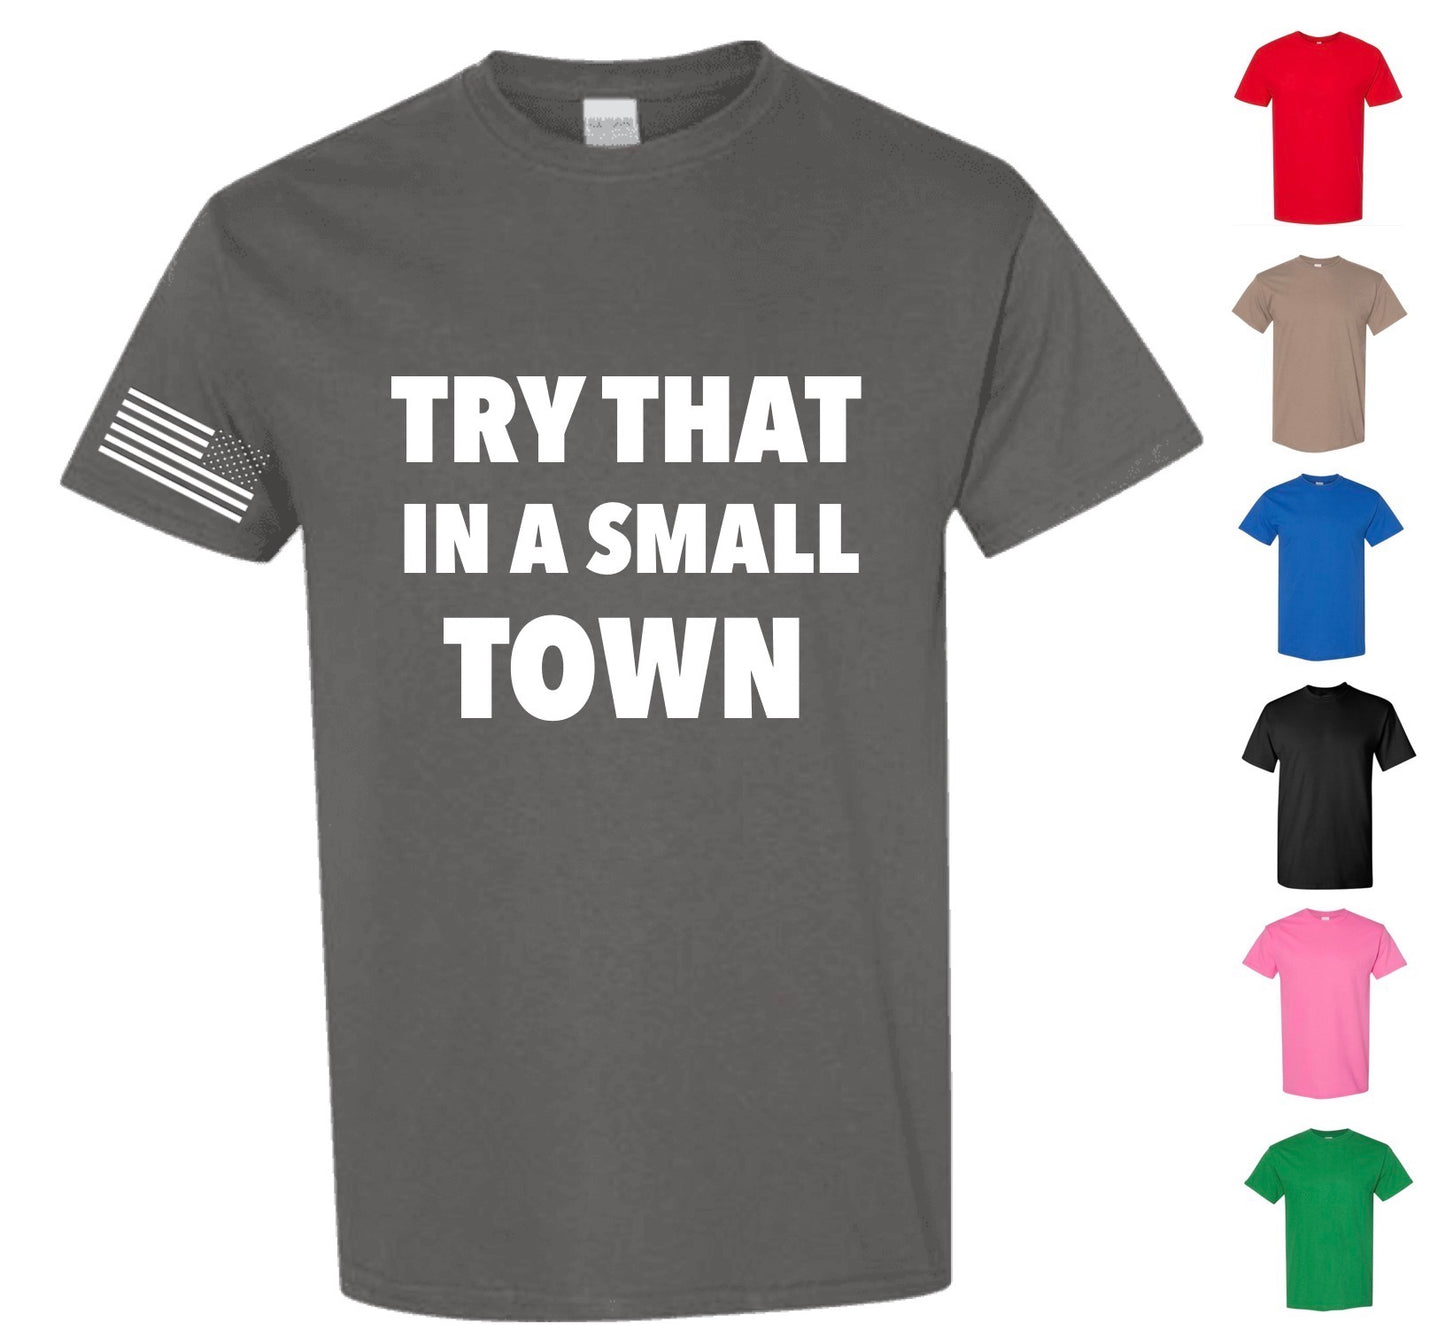 Try That In A Small Town! — Free Shipping!